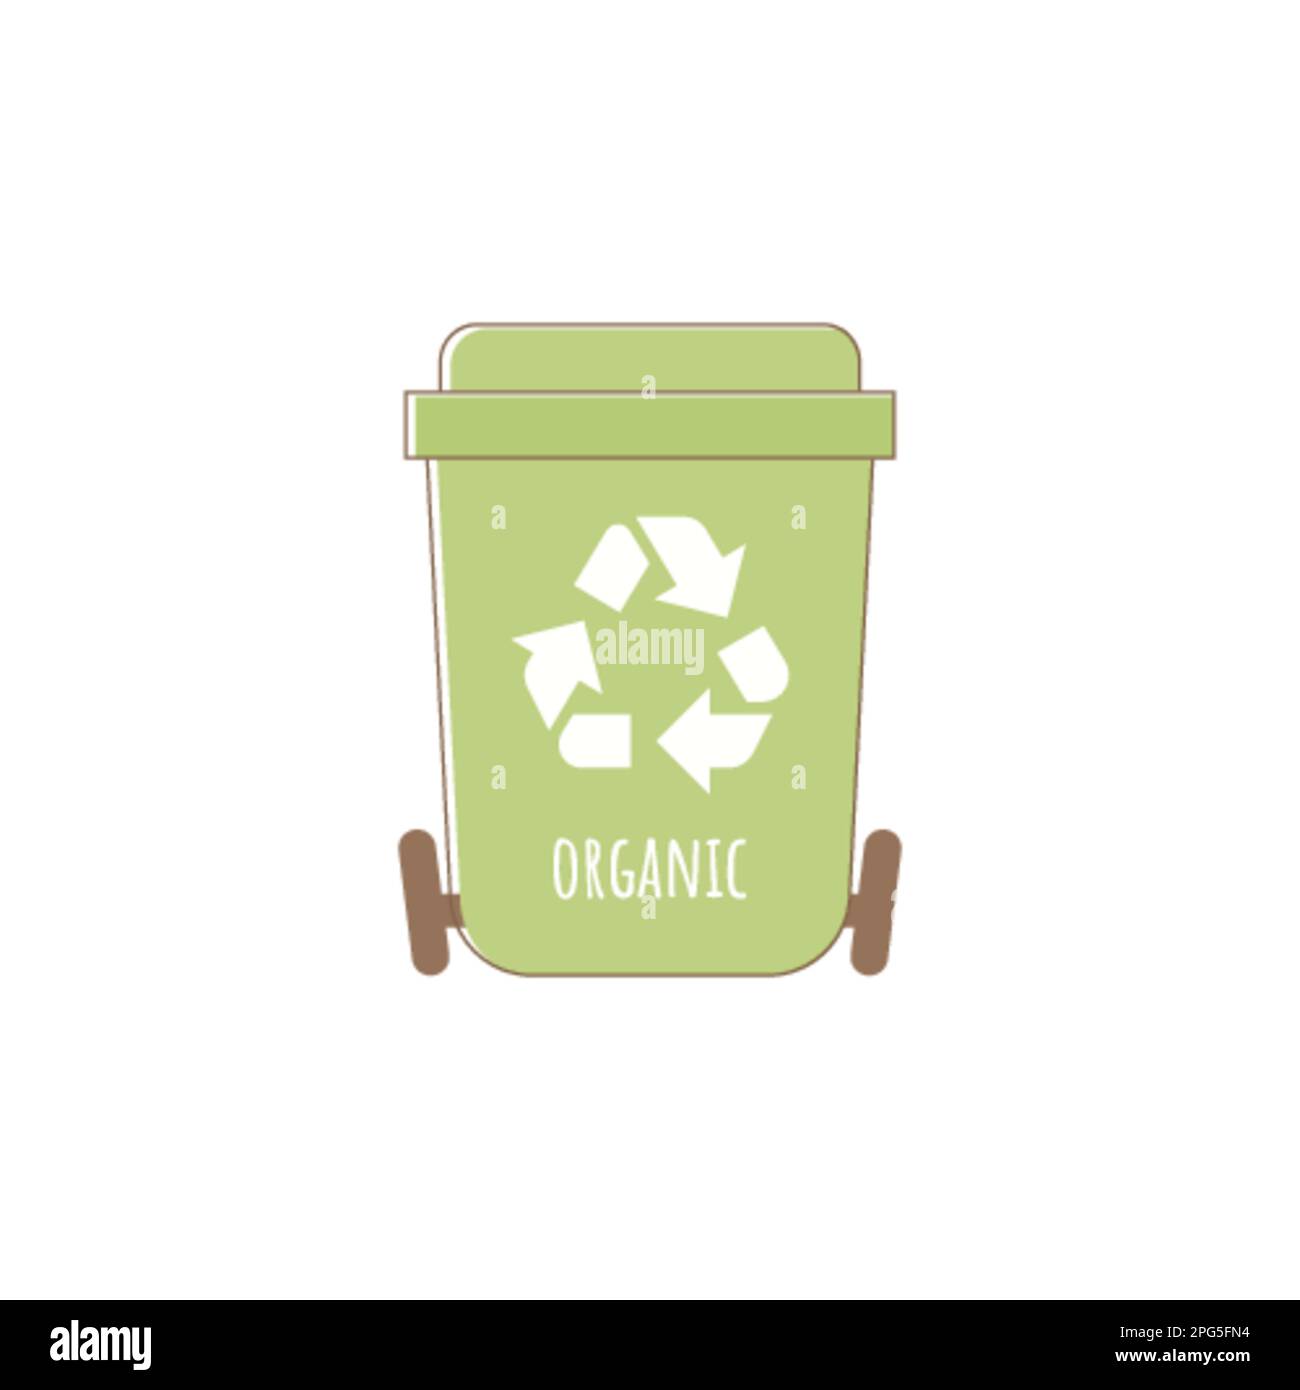 https://c8.alamy.com/comp/2PG5FN4/associations-and-symbols-sustainability-garbage-bin-with-symbols-of-recycling-garbage-sorting-design-on-a-white-background-for-your-purposes-icons-for-applications-and-sites-on-the-theme-of-ecology-vector-illustration-2PG5FN4.jpg